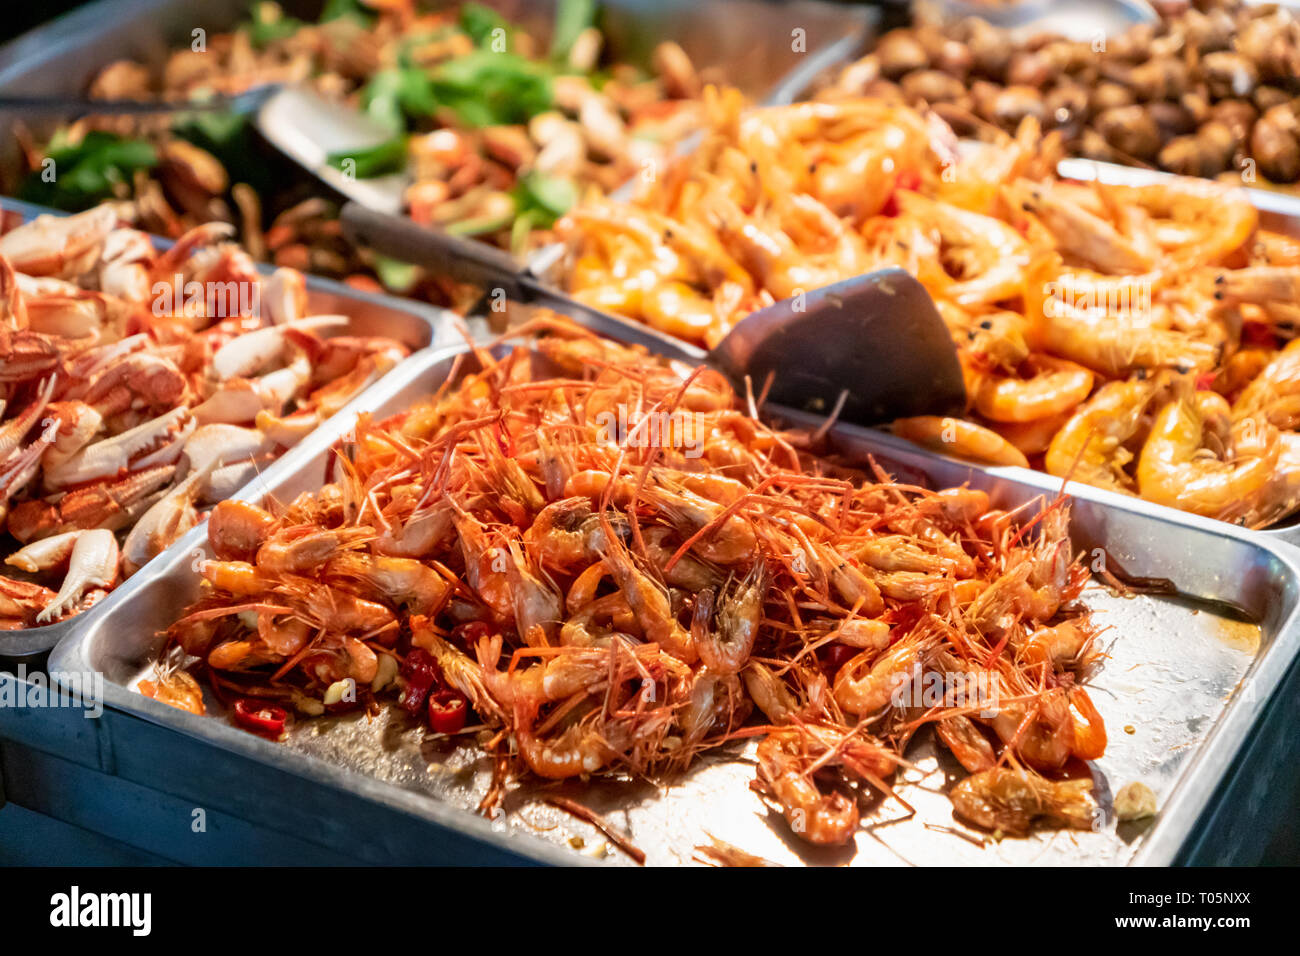 Fried shrimp in street food stall in Asian night market Stock Photo